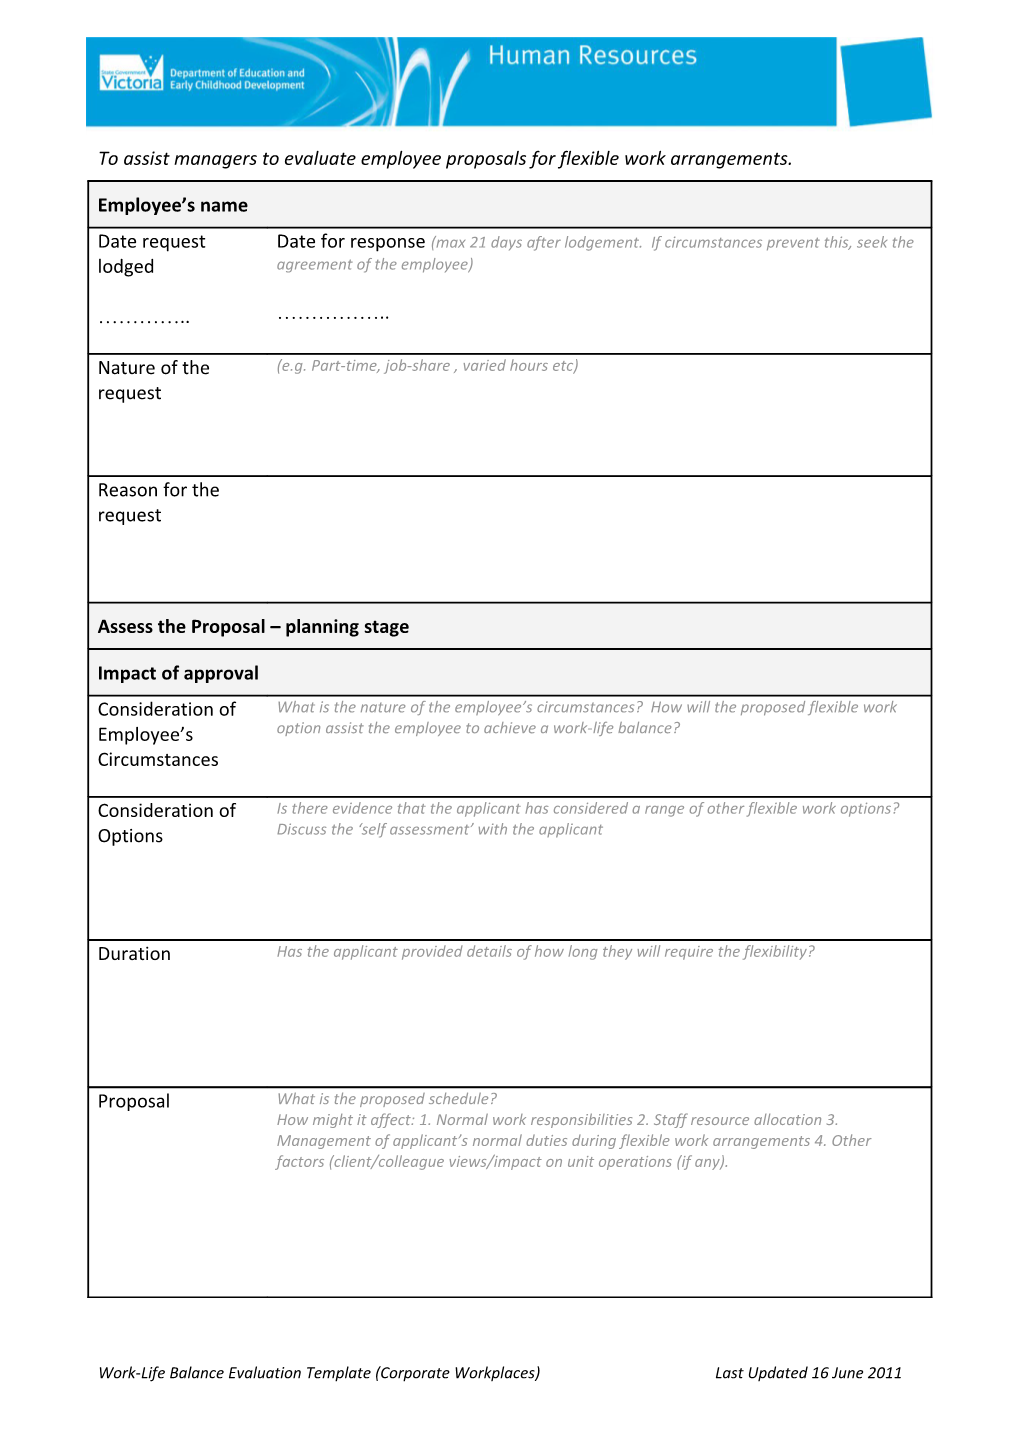 Work-Life Balance Evaluation Template (Corporate Workplaces)